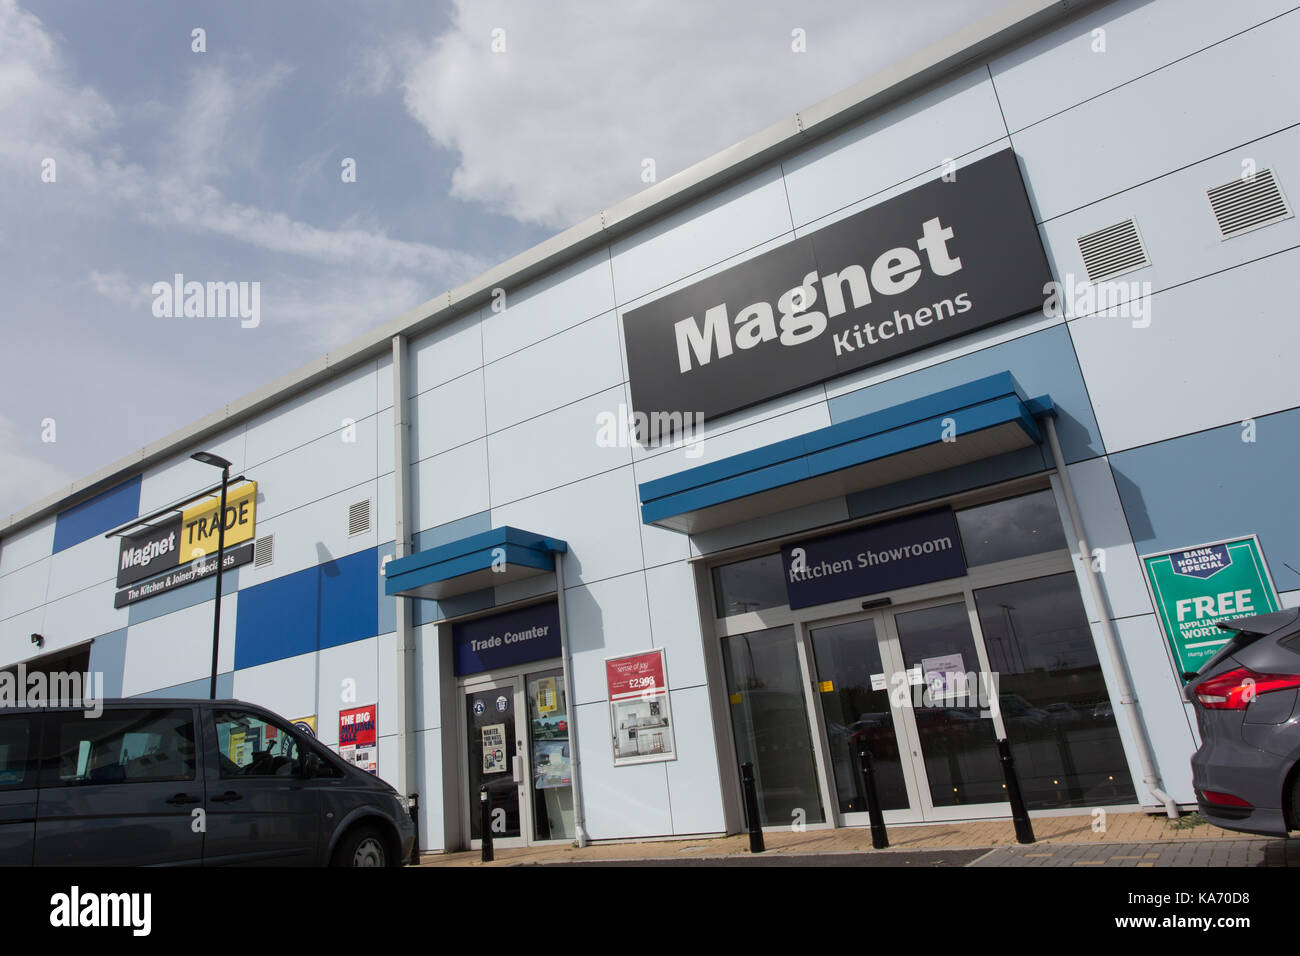 Magnet Kitchen outlet, Vantage Trade Centre, Coventry. Stock Photo